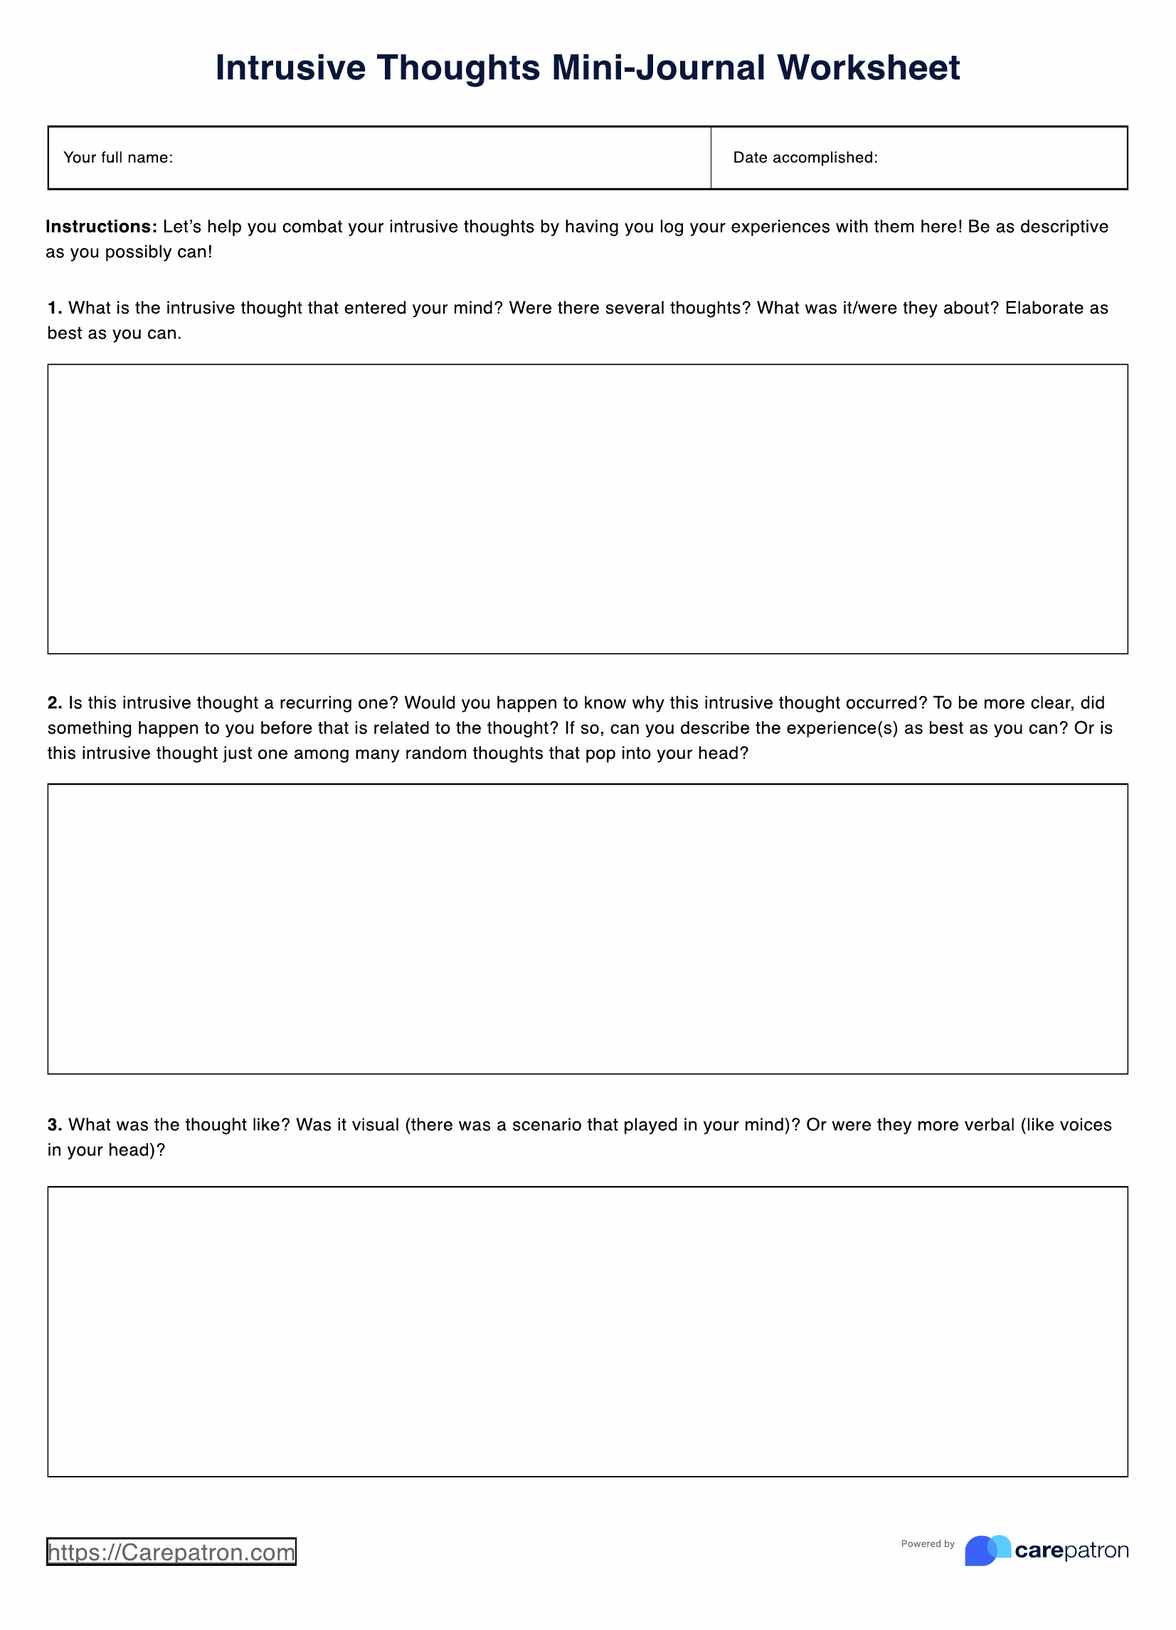 Intrusive Thoughts Worksheet PDF Example